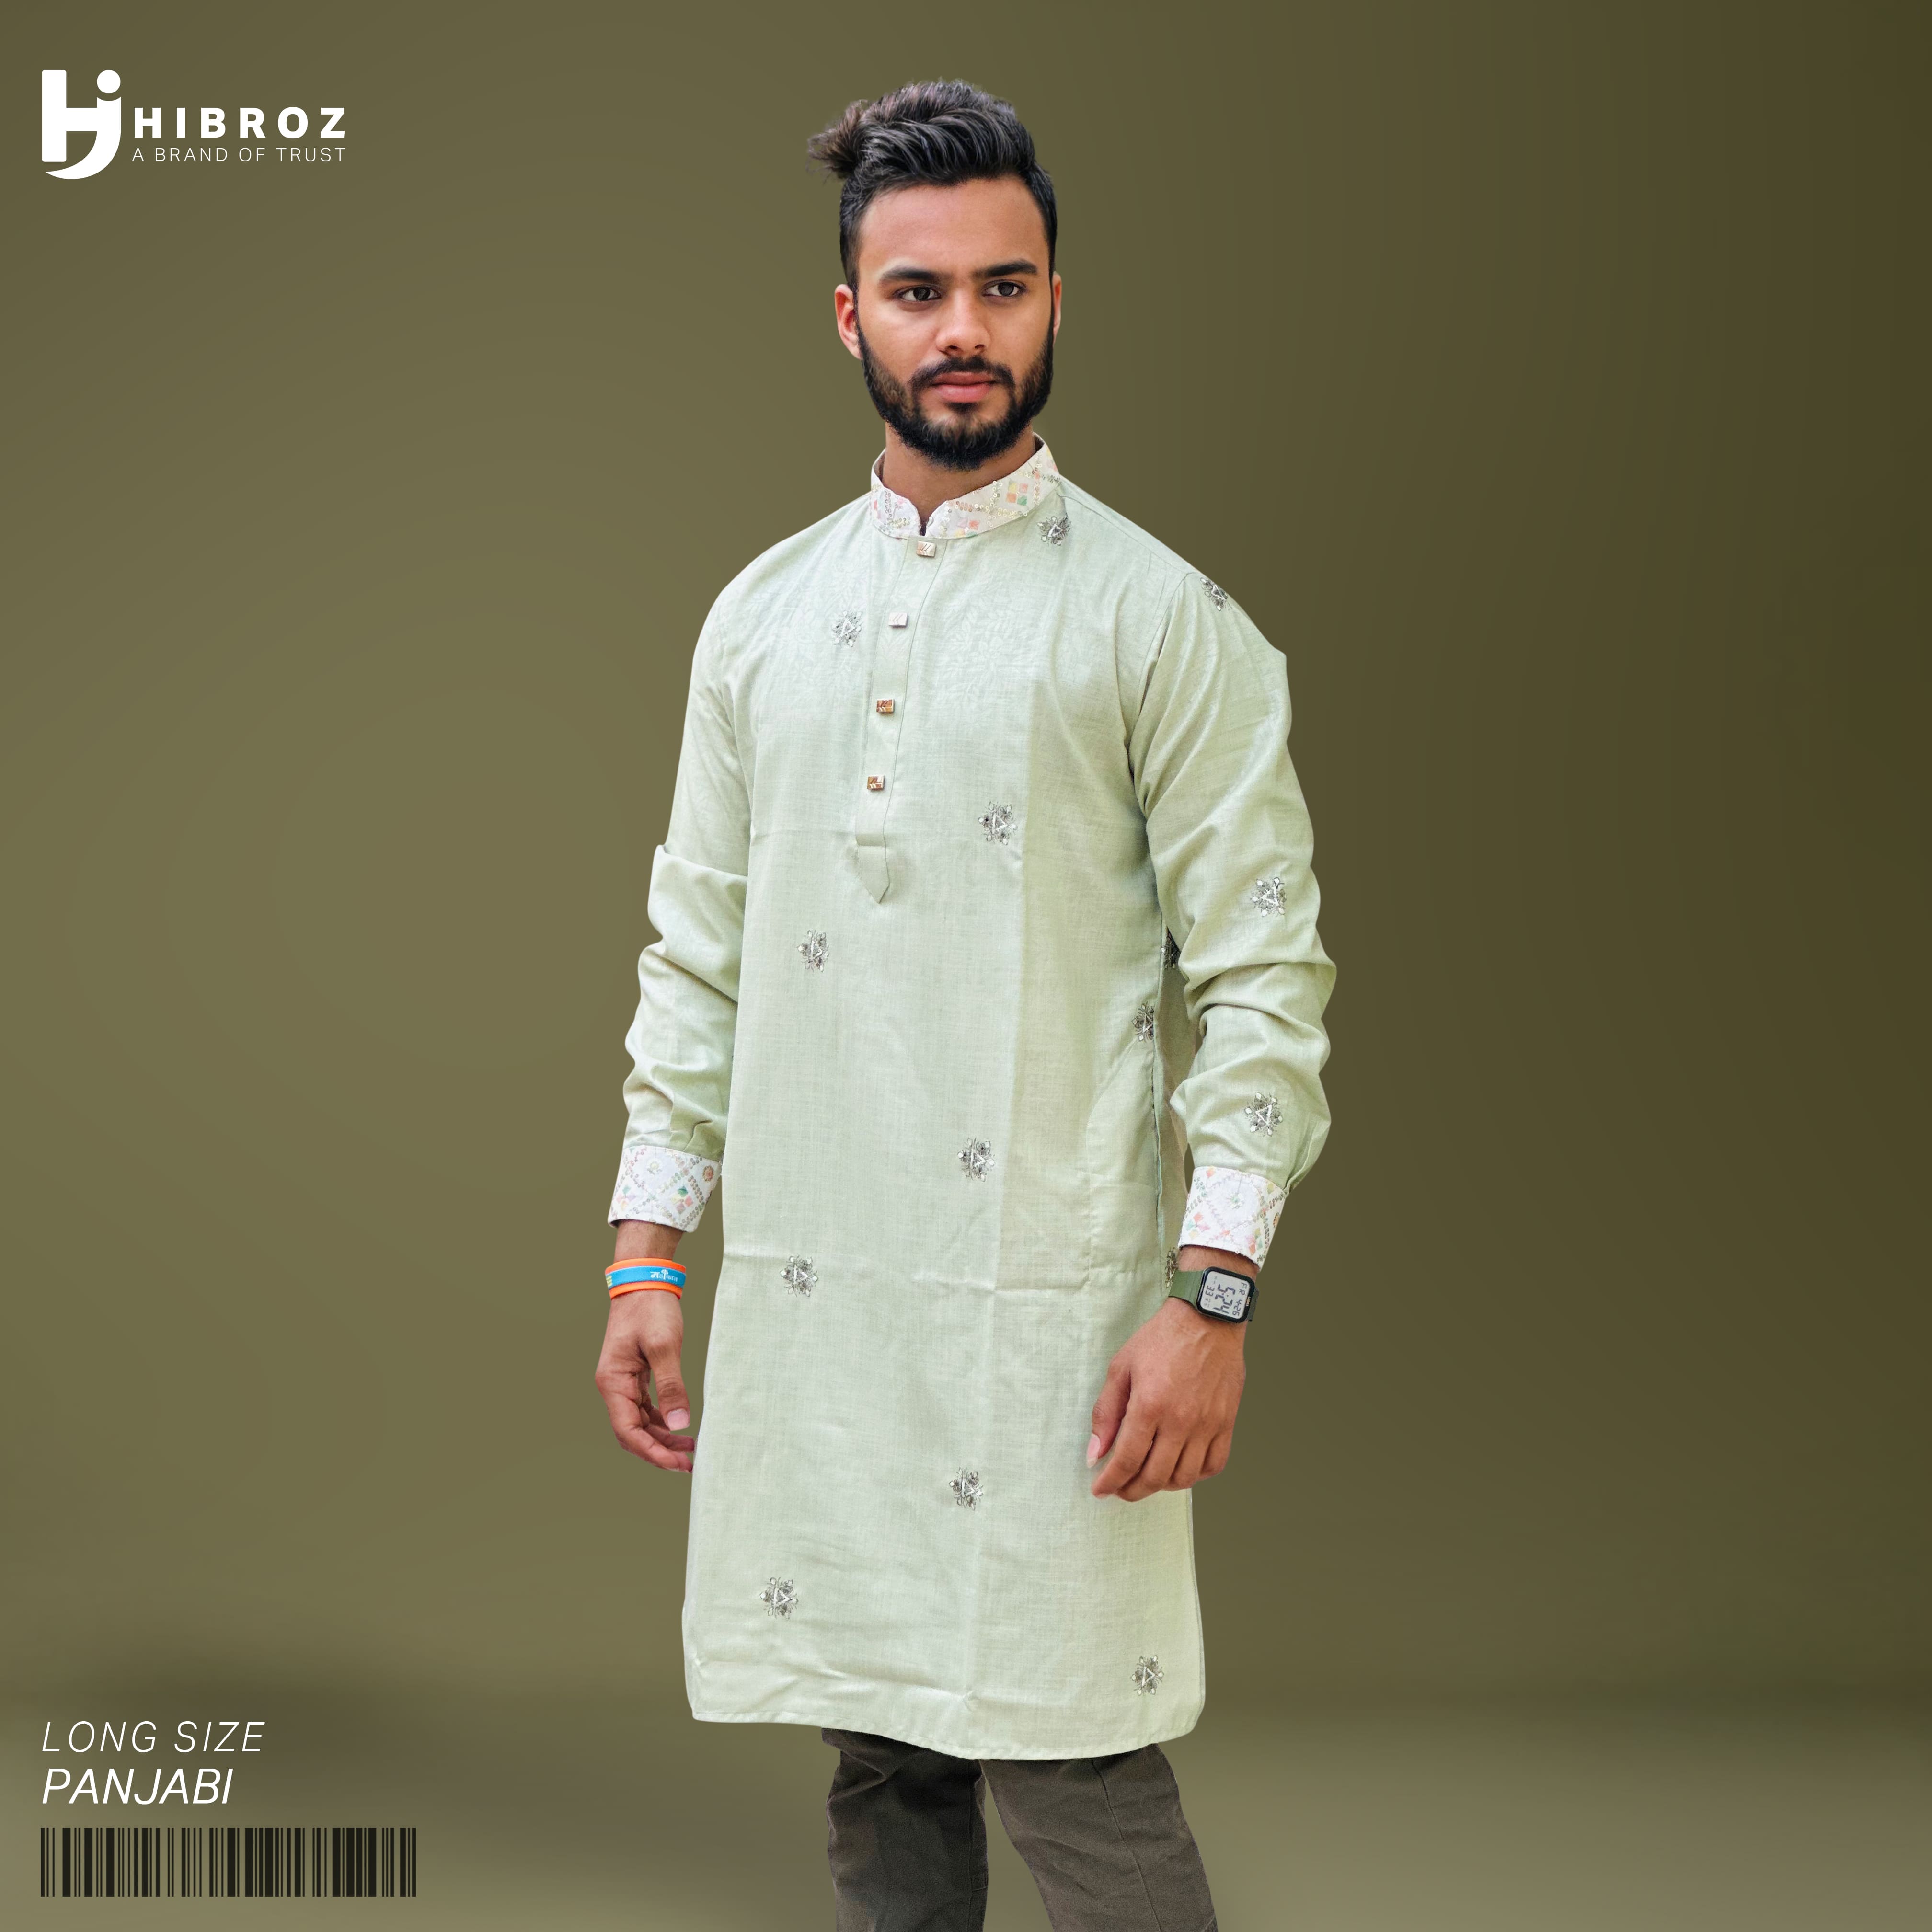 .Ivory tie-dyed cotton slim fit panjabi with white embroidery. Features in-seam side pockets.